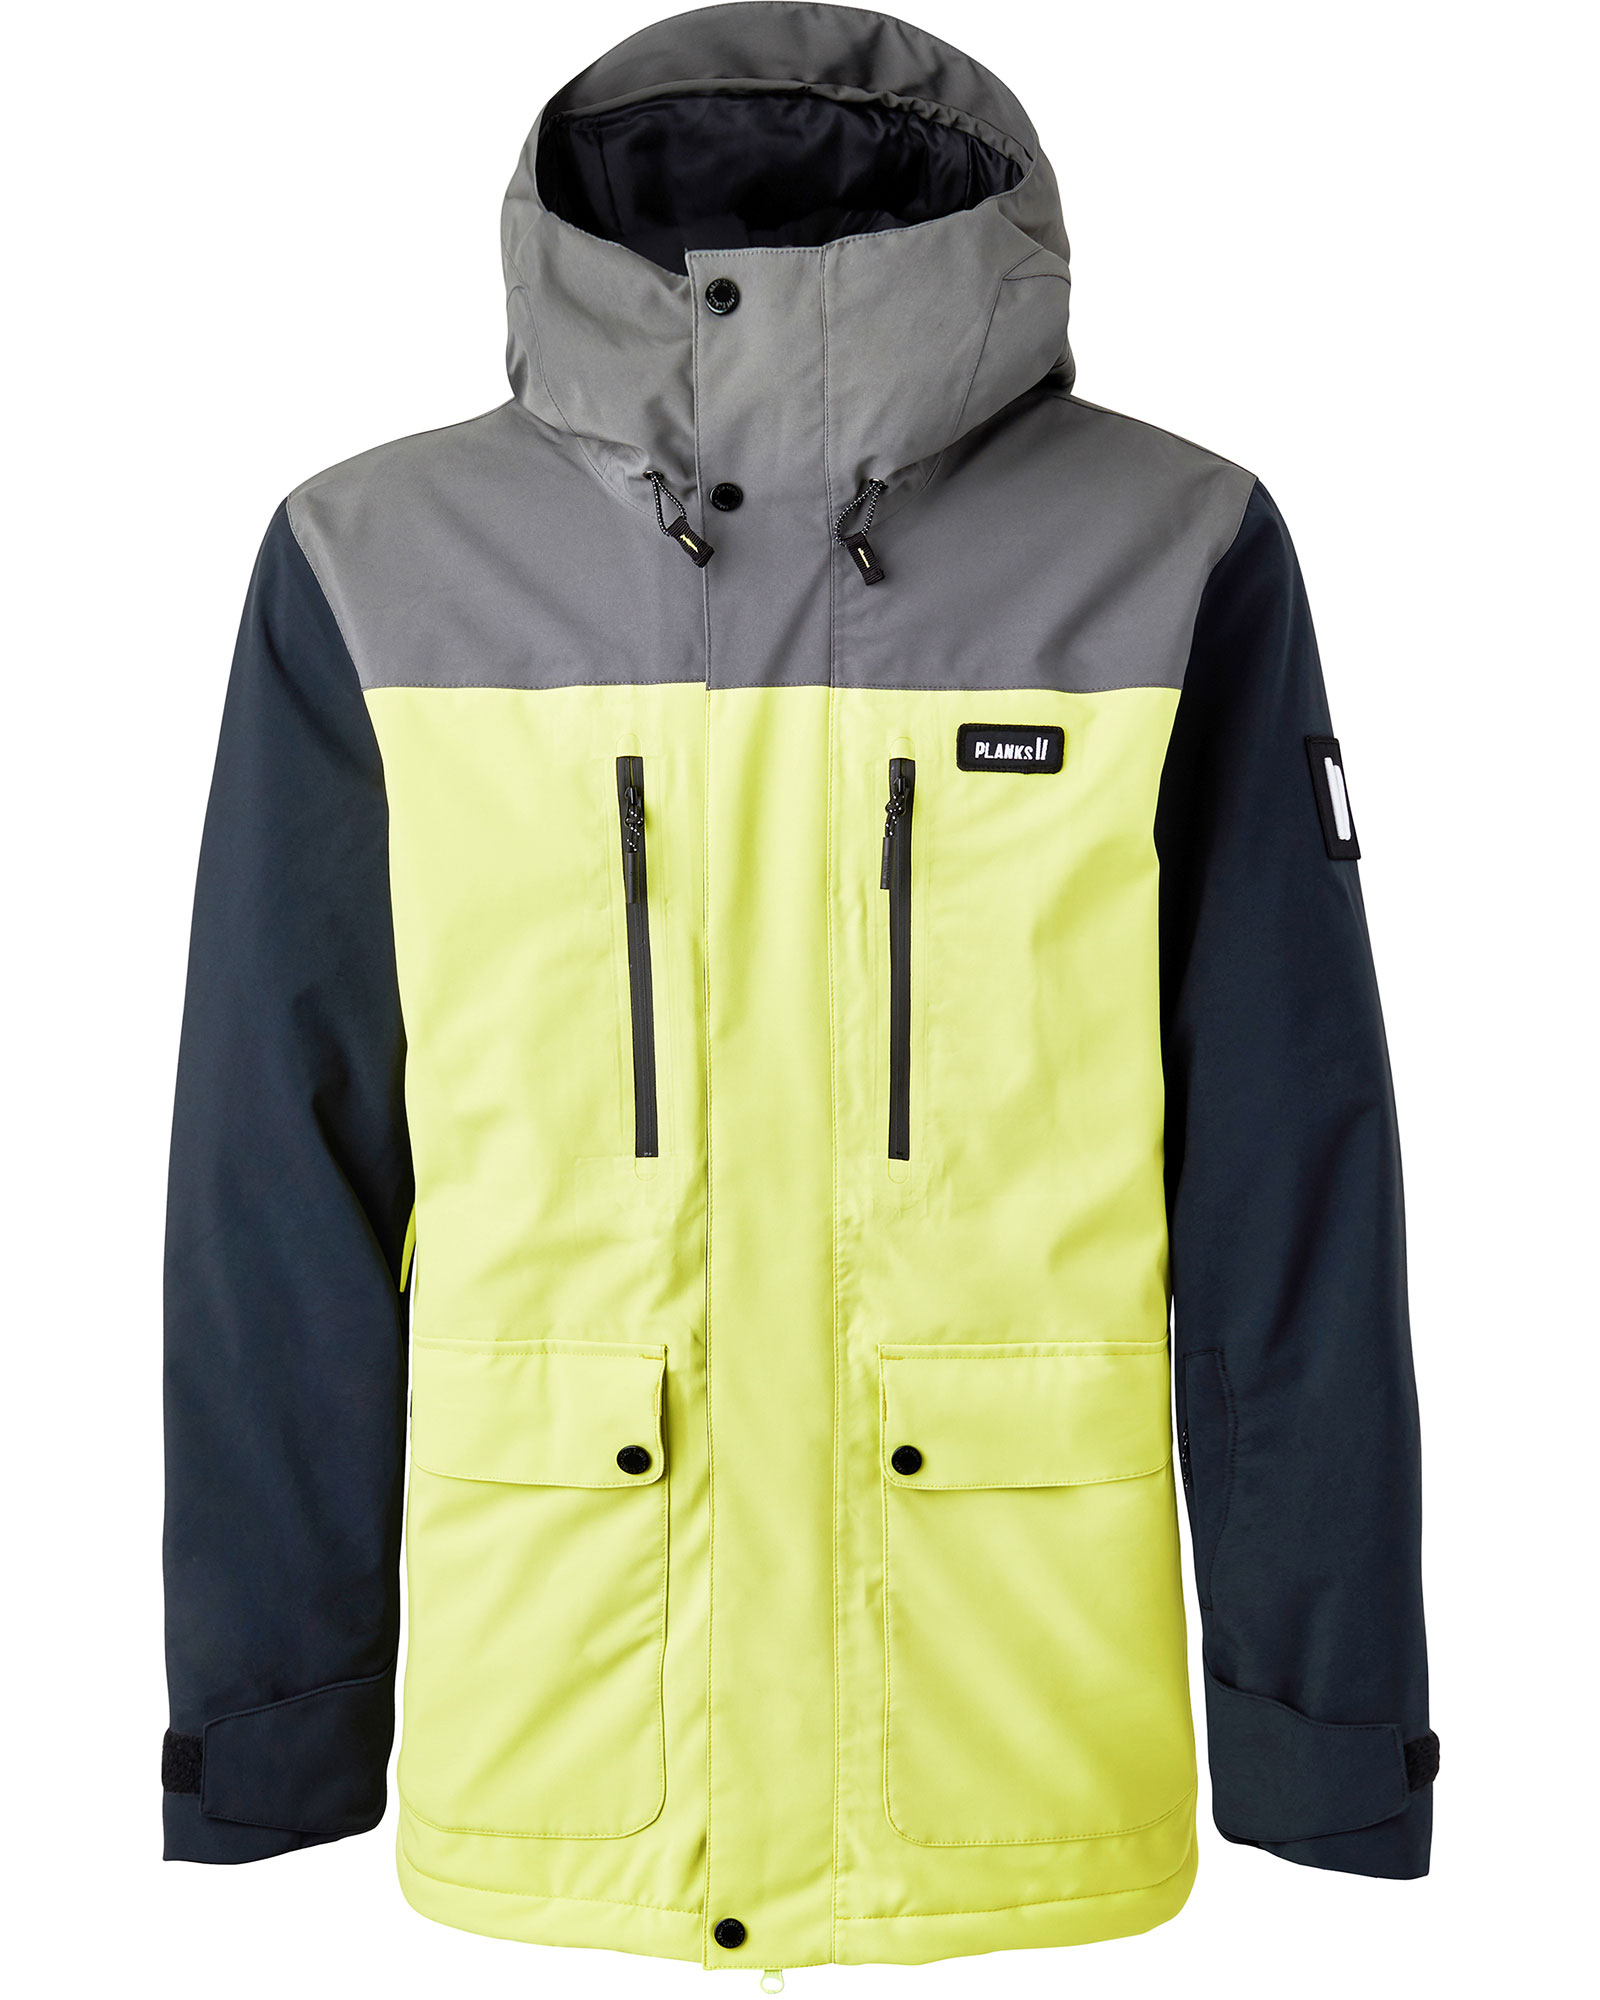 Planks Good Times Men’s Insulated Jacket - Fluro Lime M